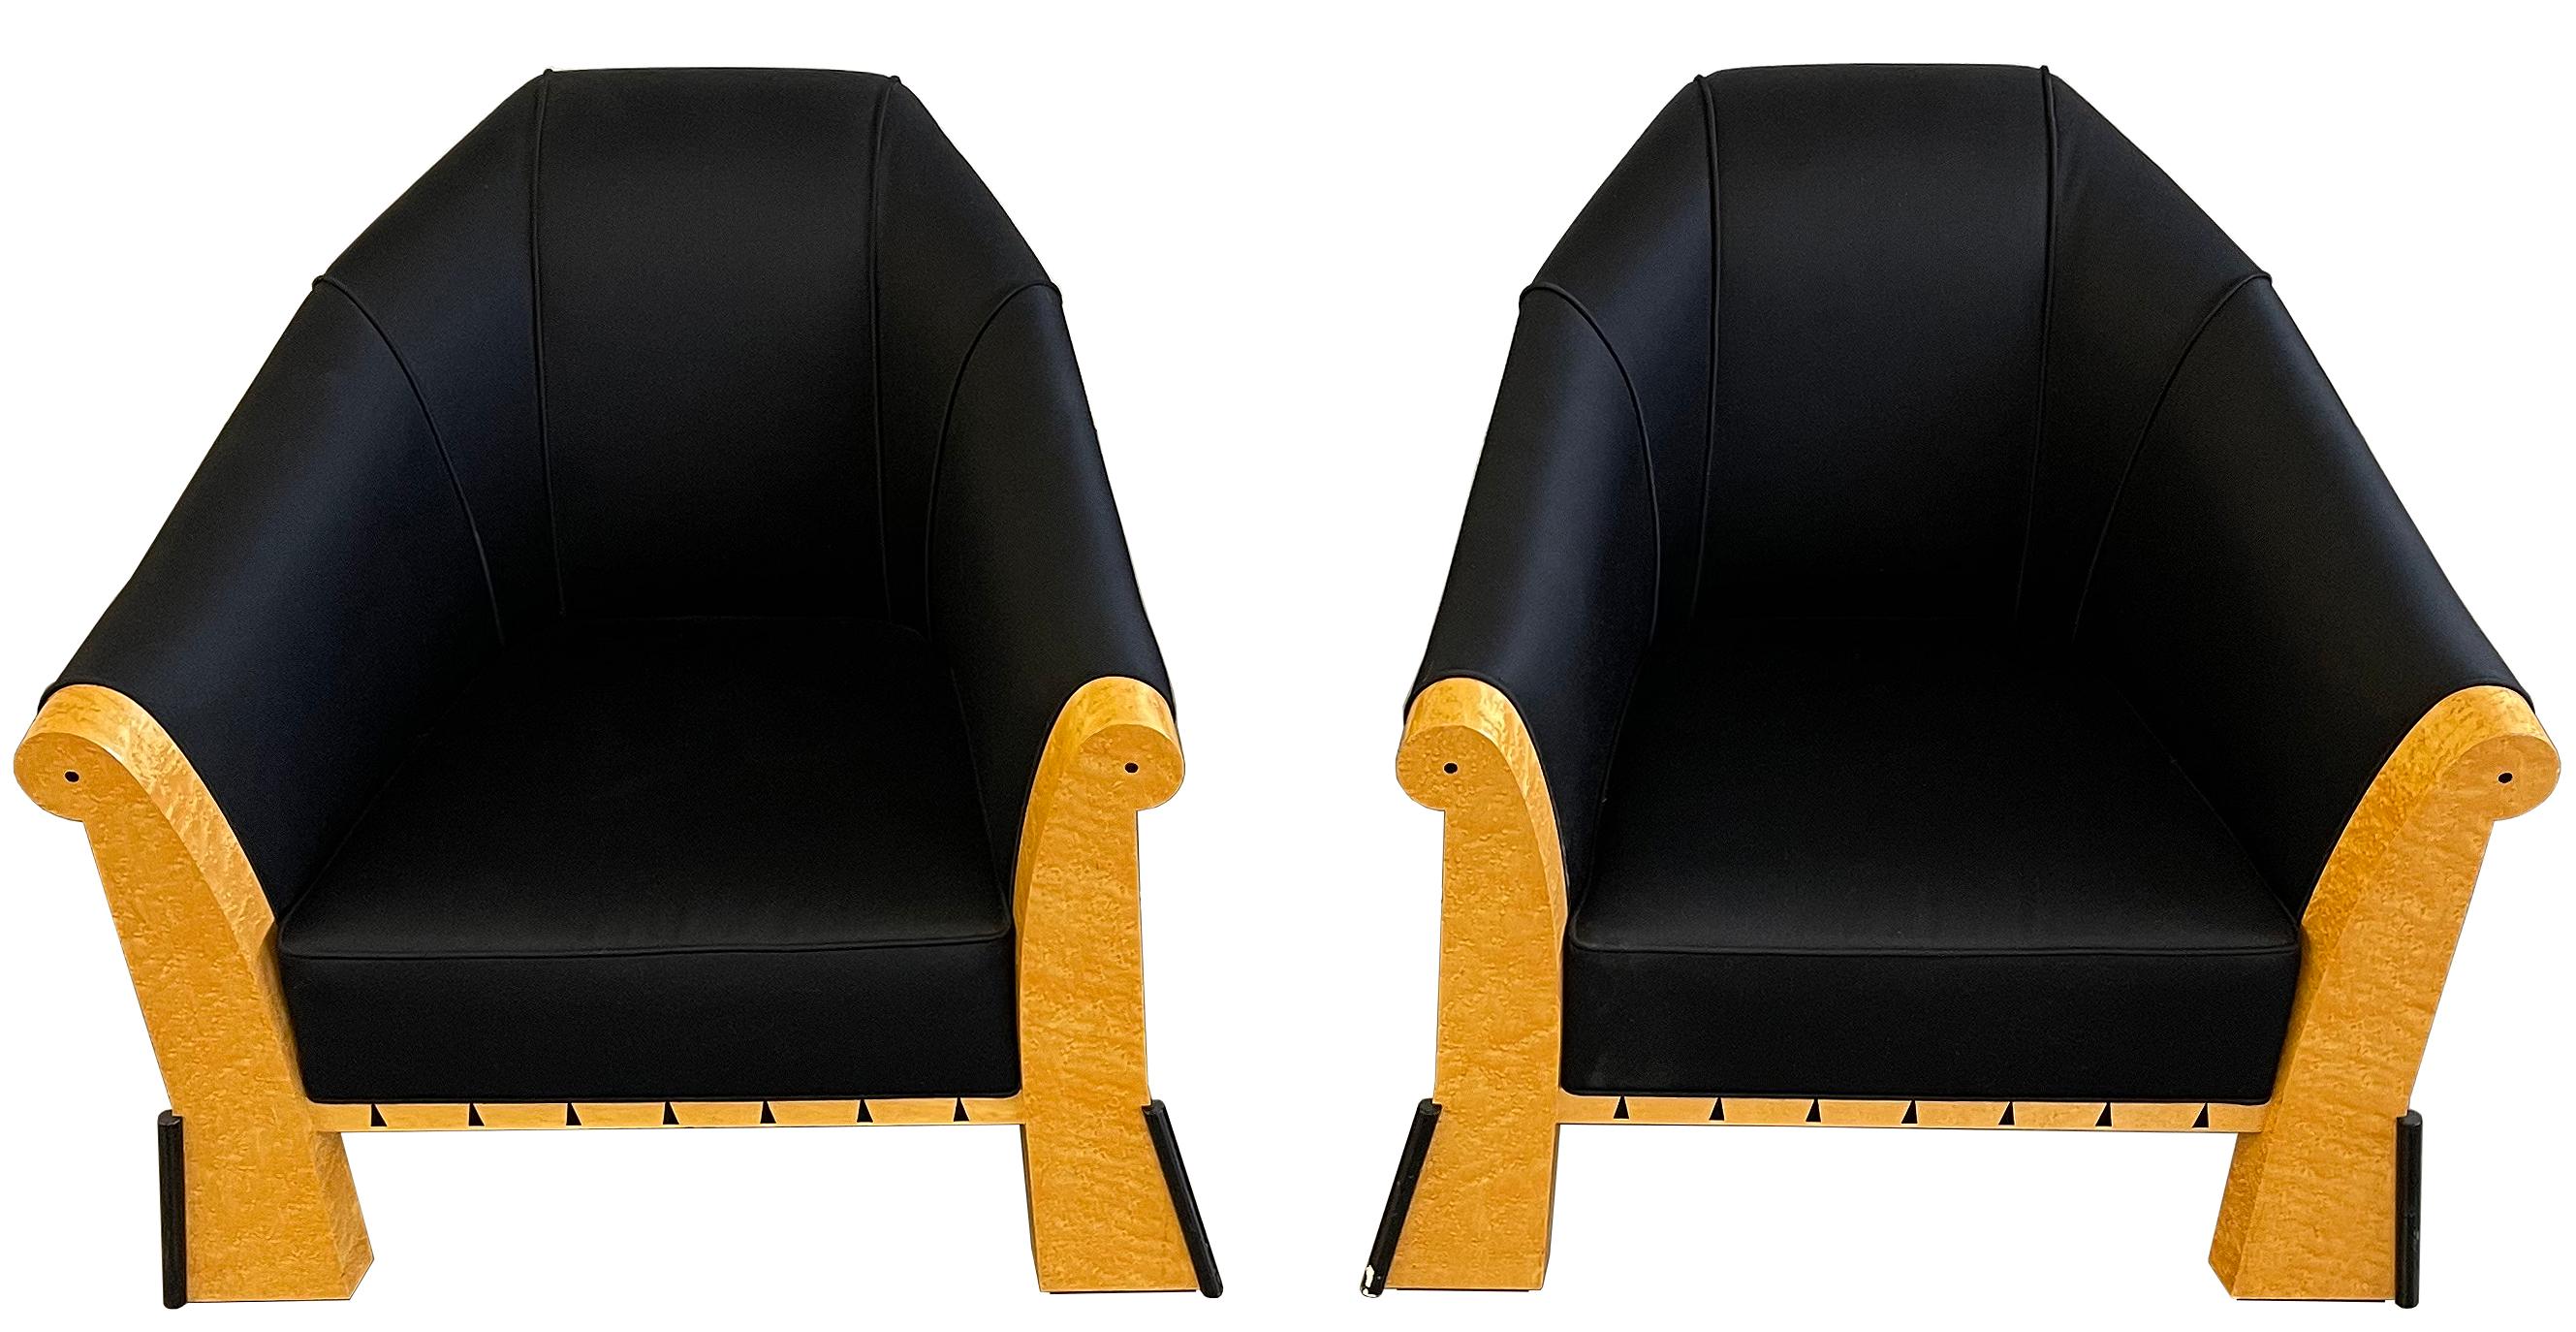 An amazing pair of Postmodern lounge chairs by iconic designer Michael Graves, circa 1980
These chairs were created with the highest quality materials and craftsmanship. 

A rare pair in original black silk textile. 

Crafted of bird's-eye